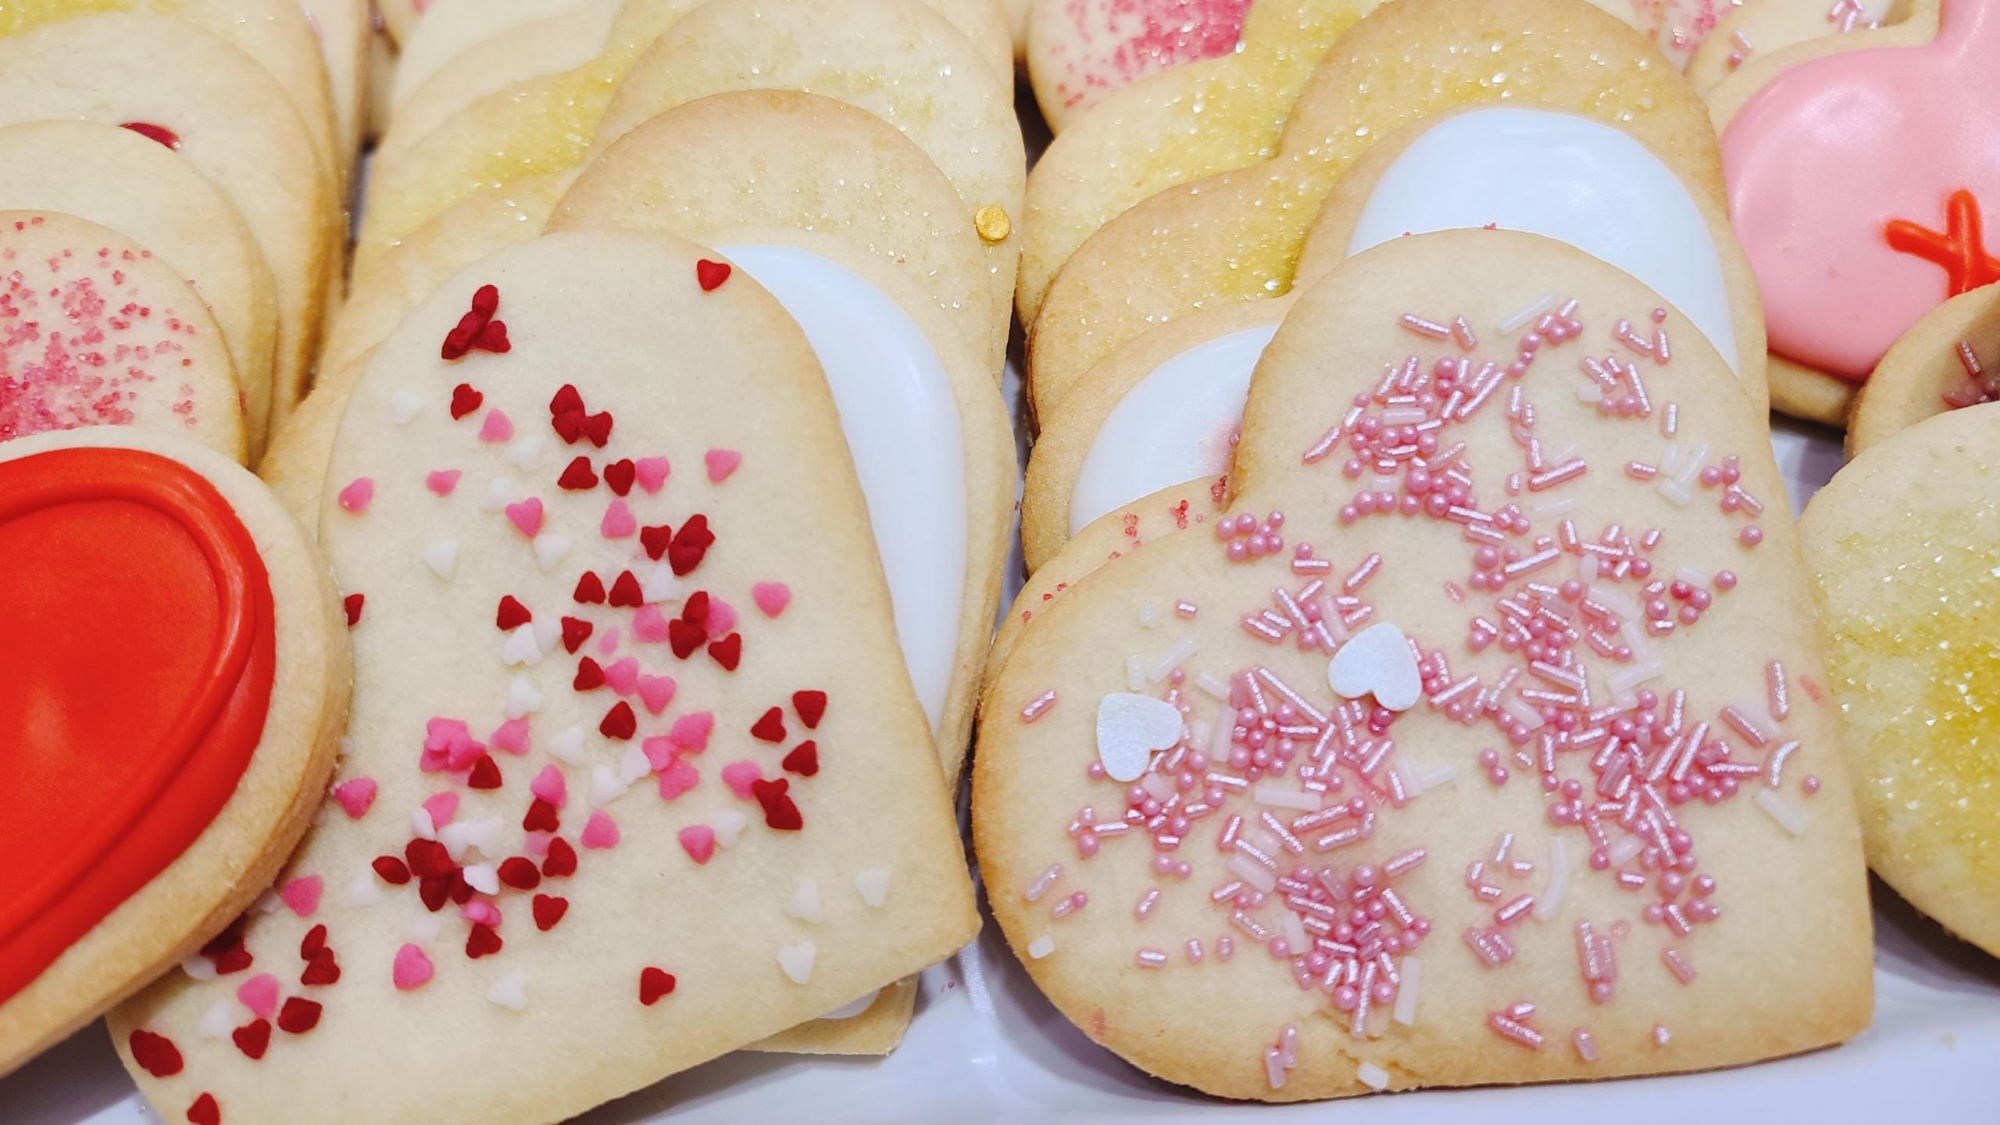 Heart-shaped cookies decorated with various sprinkles and icing